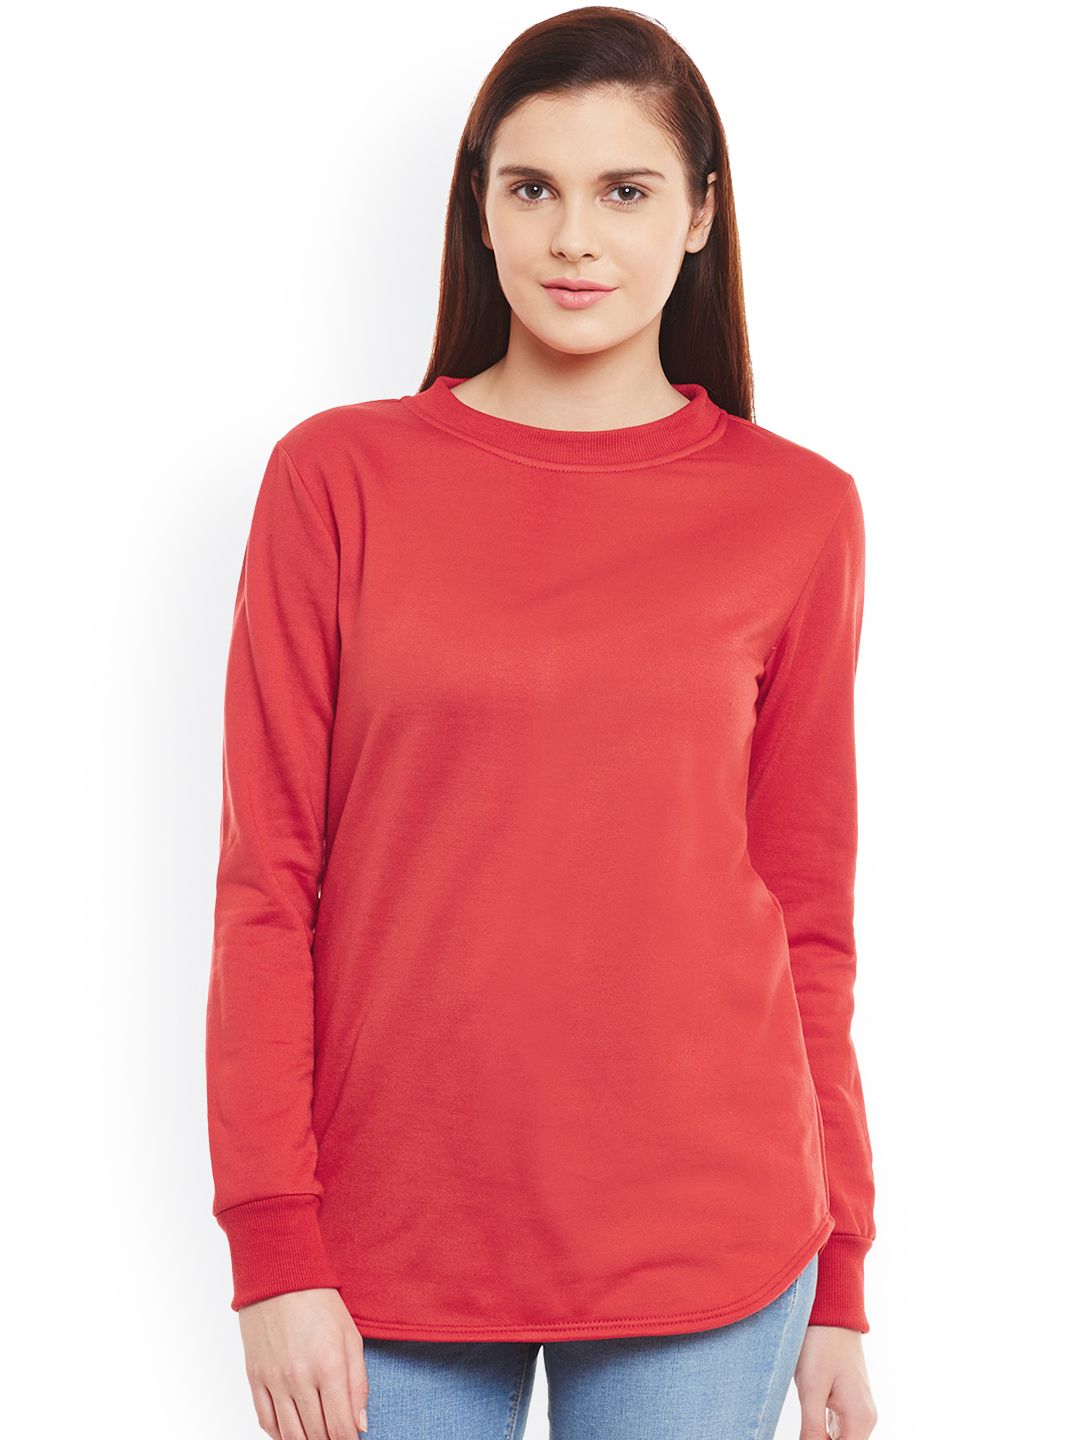 Belle Fille Red Sweatshirt Price in India